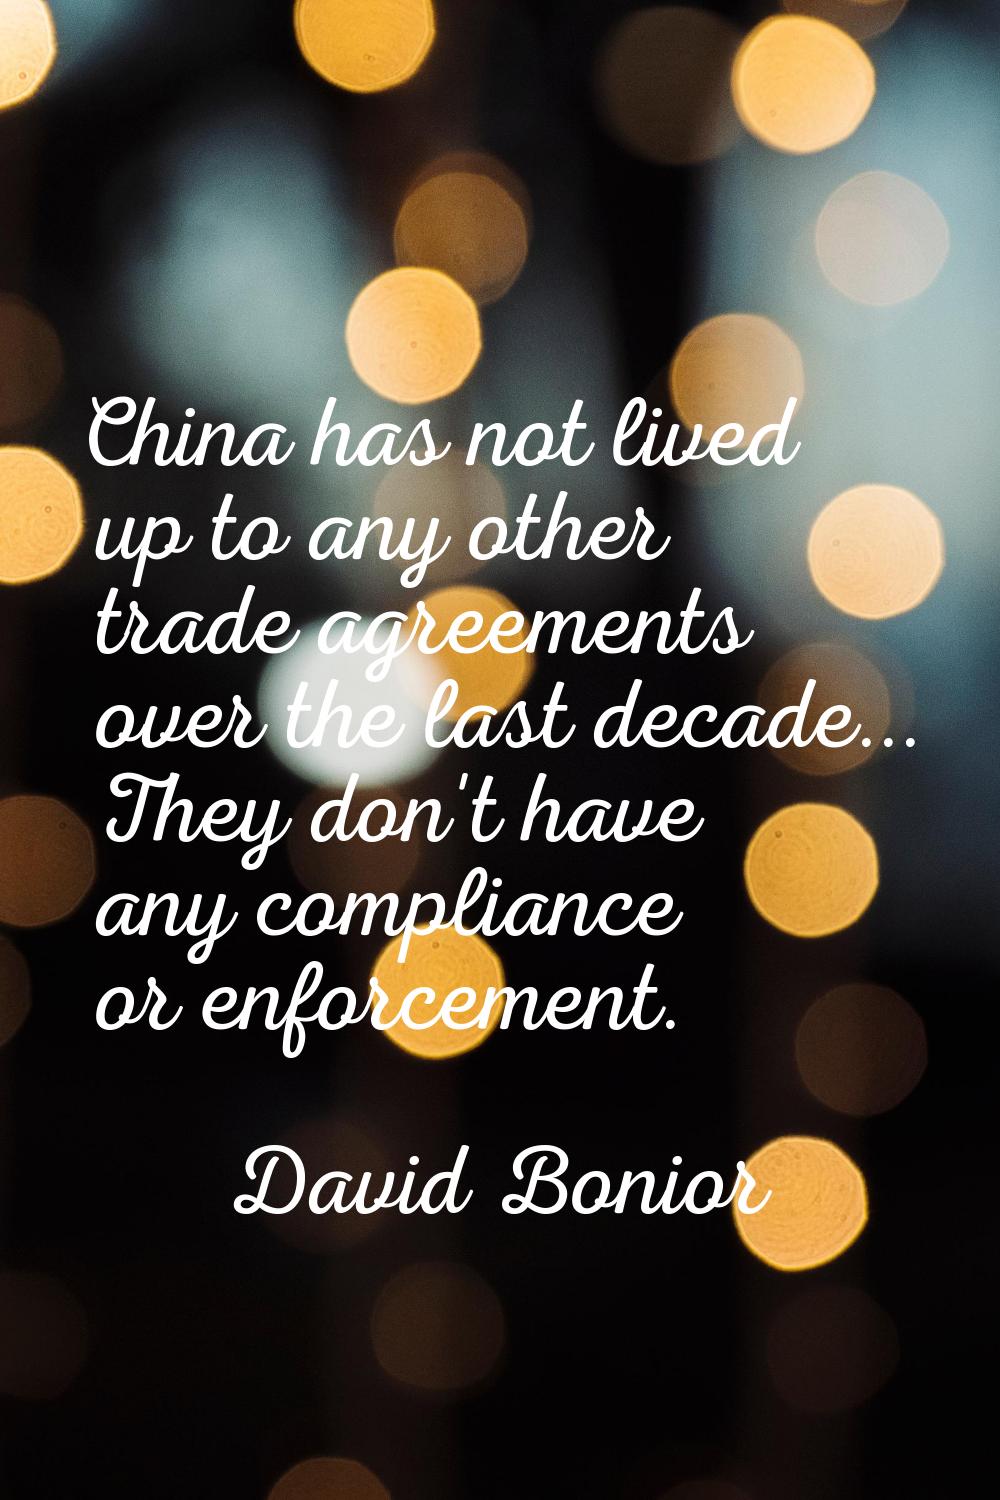 China has not lived up to any other trade agreements over the last decade... They don't have any co